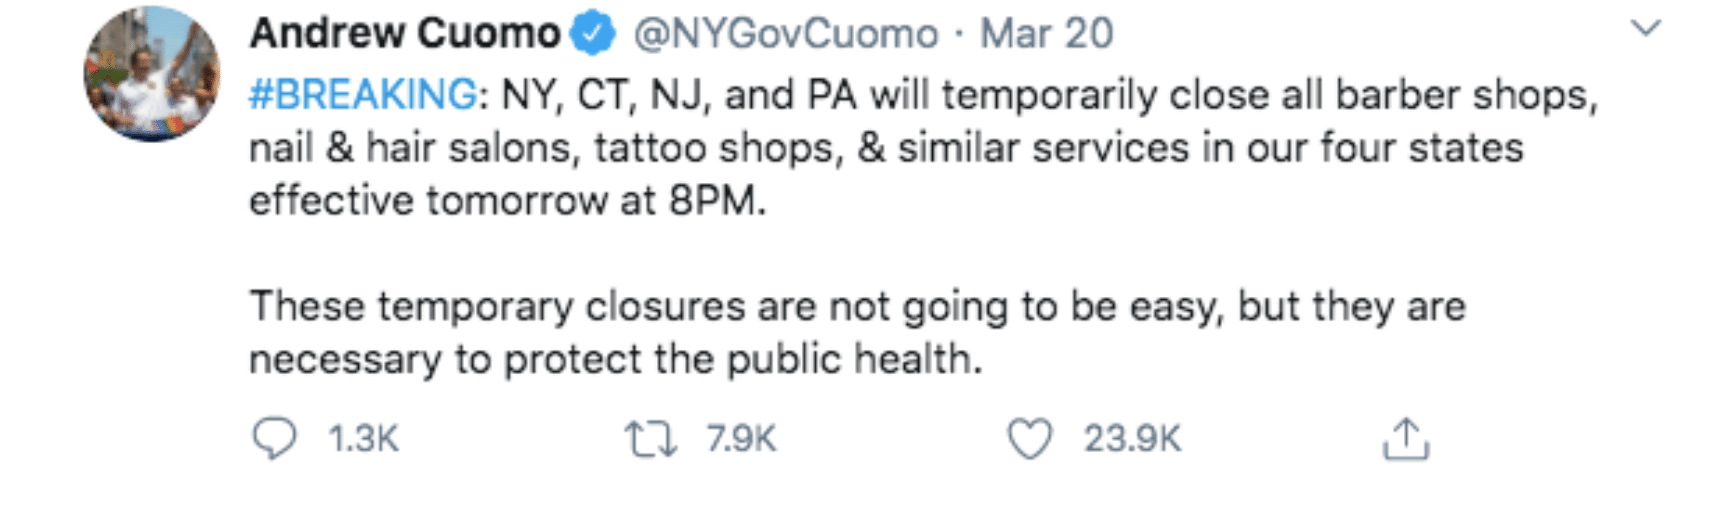 Tweet by New York Governor Andrew Cuomo stay-at-home order